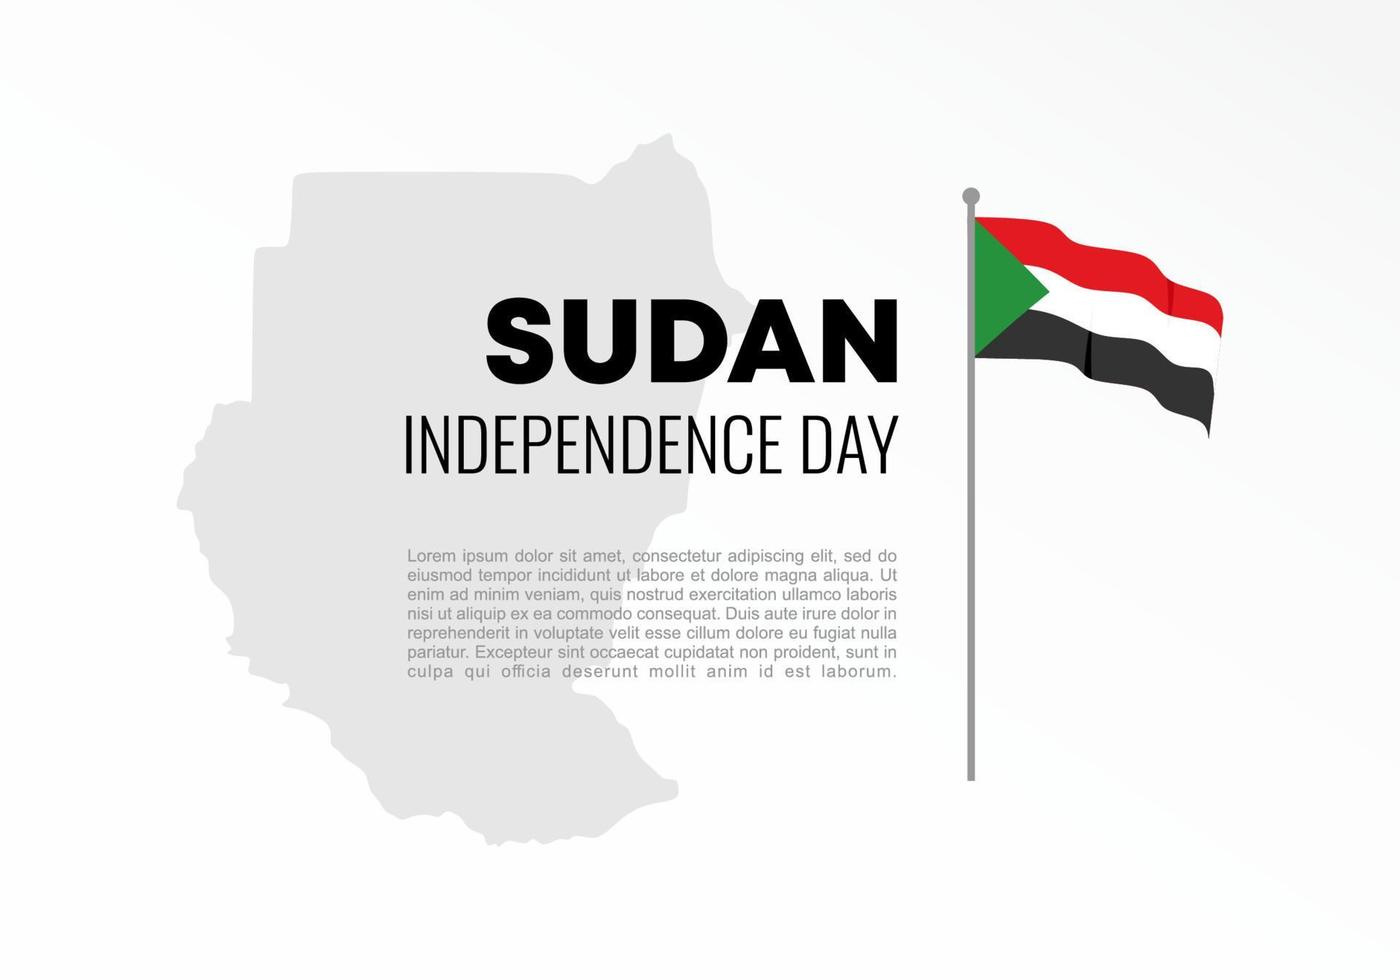 Sudan independence day poster for celebration on January 1 st. vector